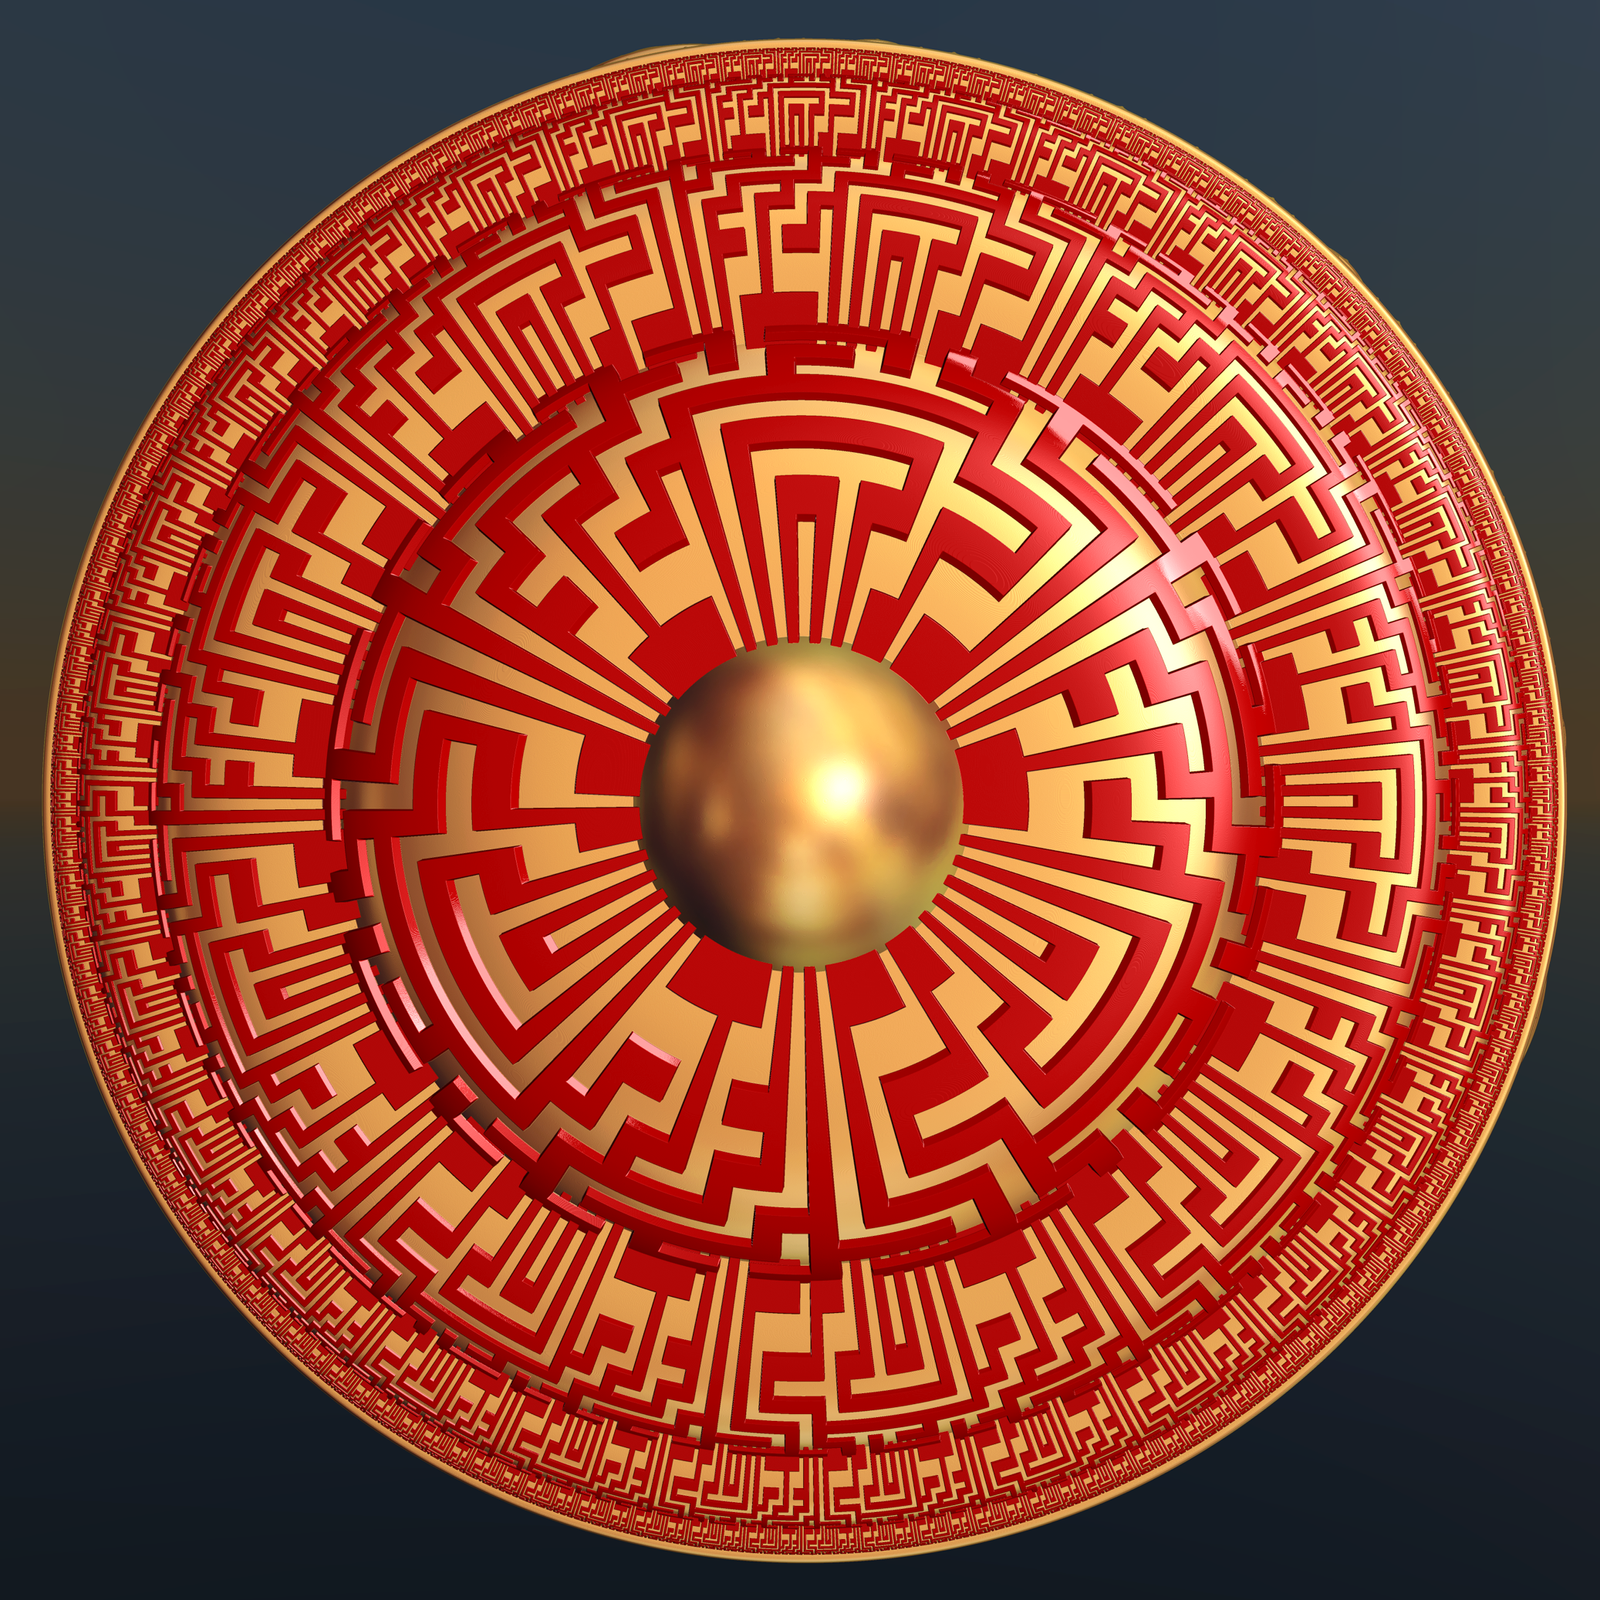 http://img00.deviantart.net/7362/i/2010/086/0/3/chinese_shield_by_roddh.png